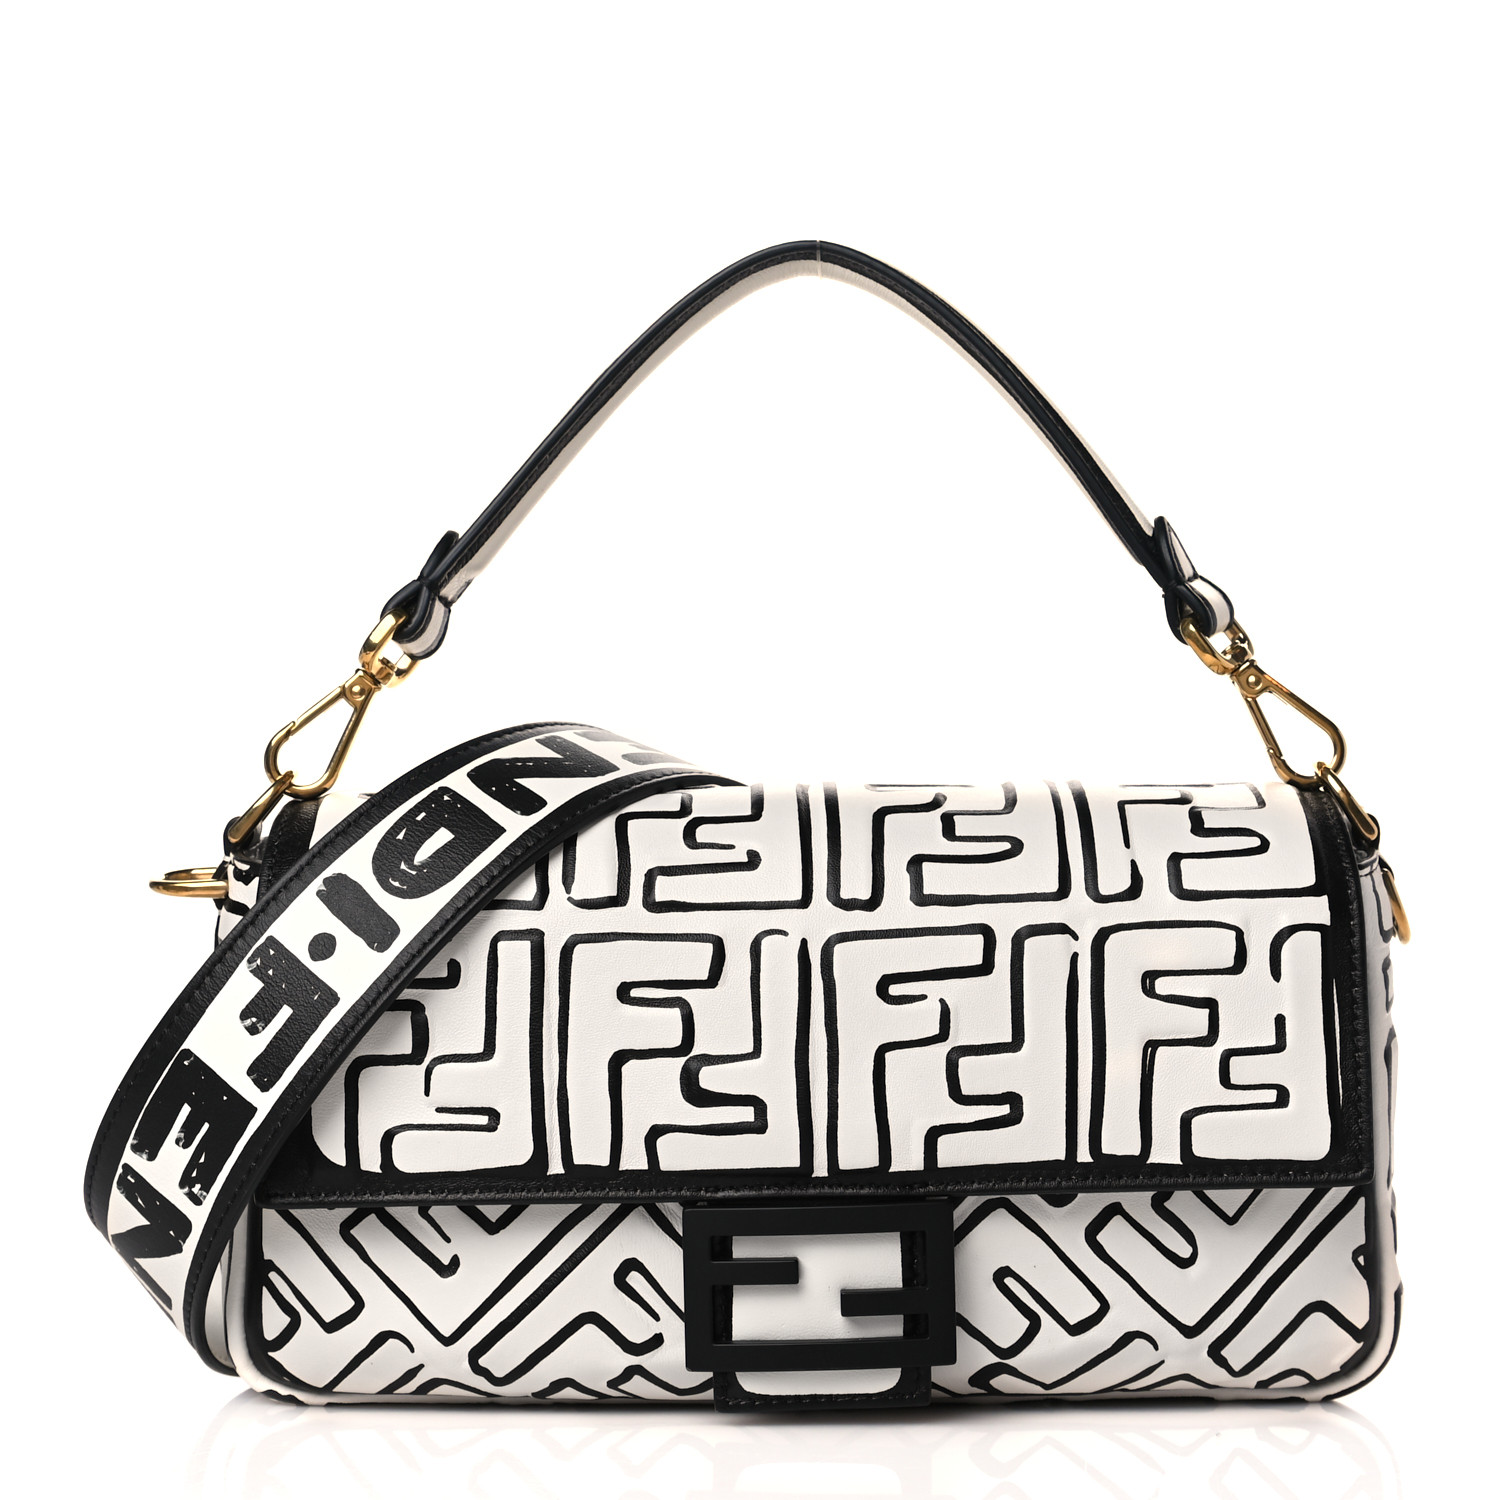 image of FENDI X JOSHUA VIDES Nappa FF Embossed Baguette in the colors White and Black by FASHIONPHILE